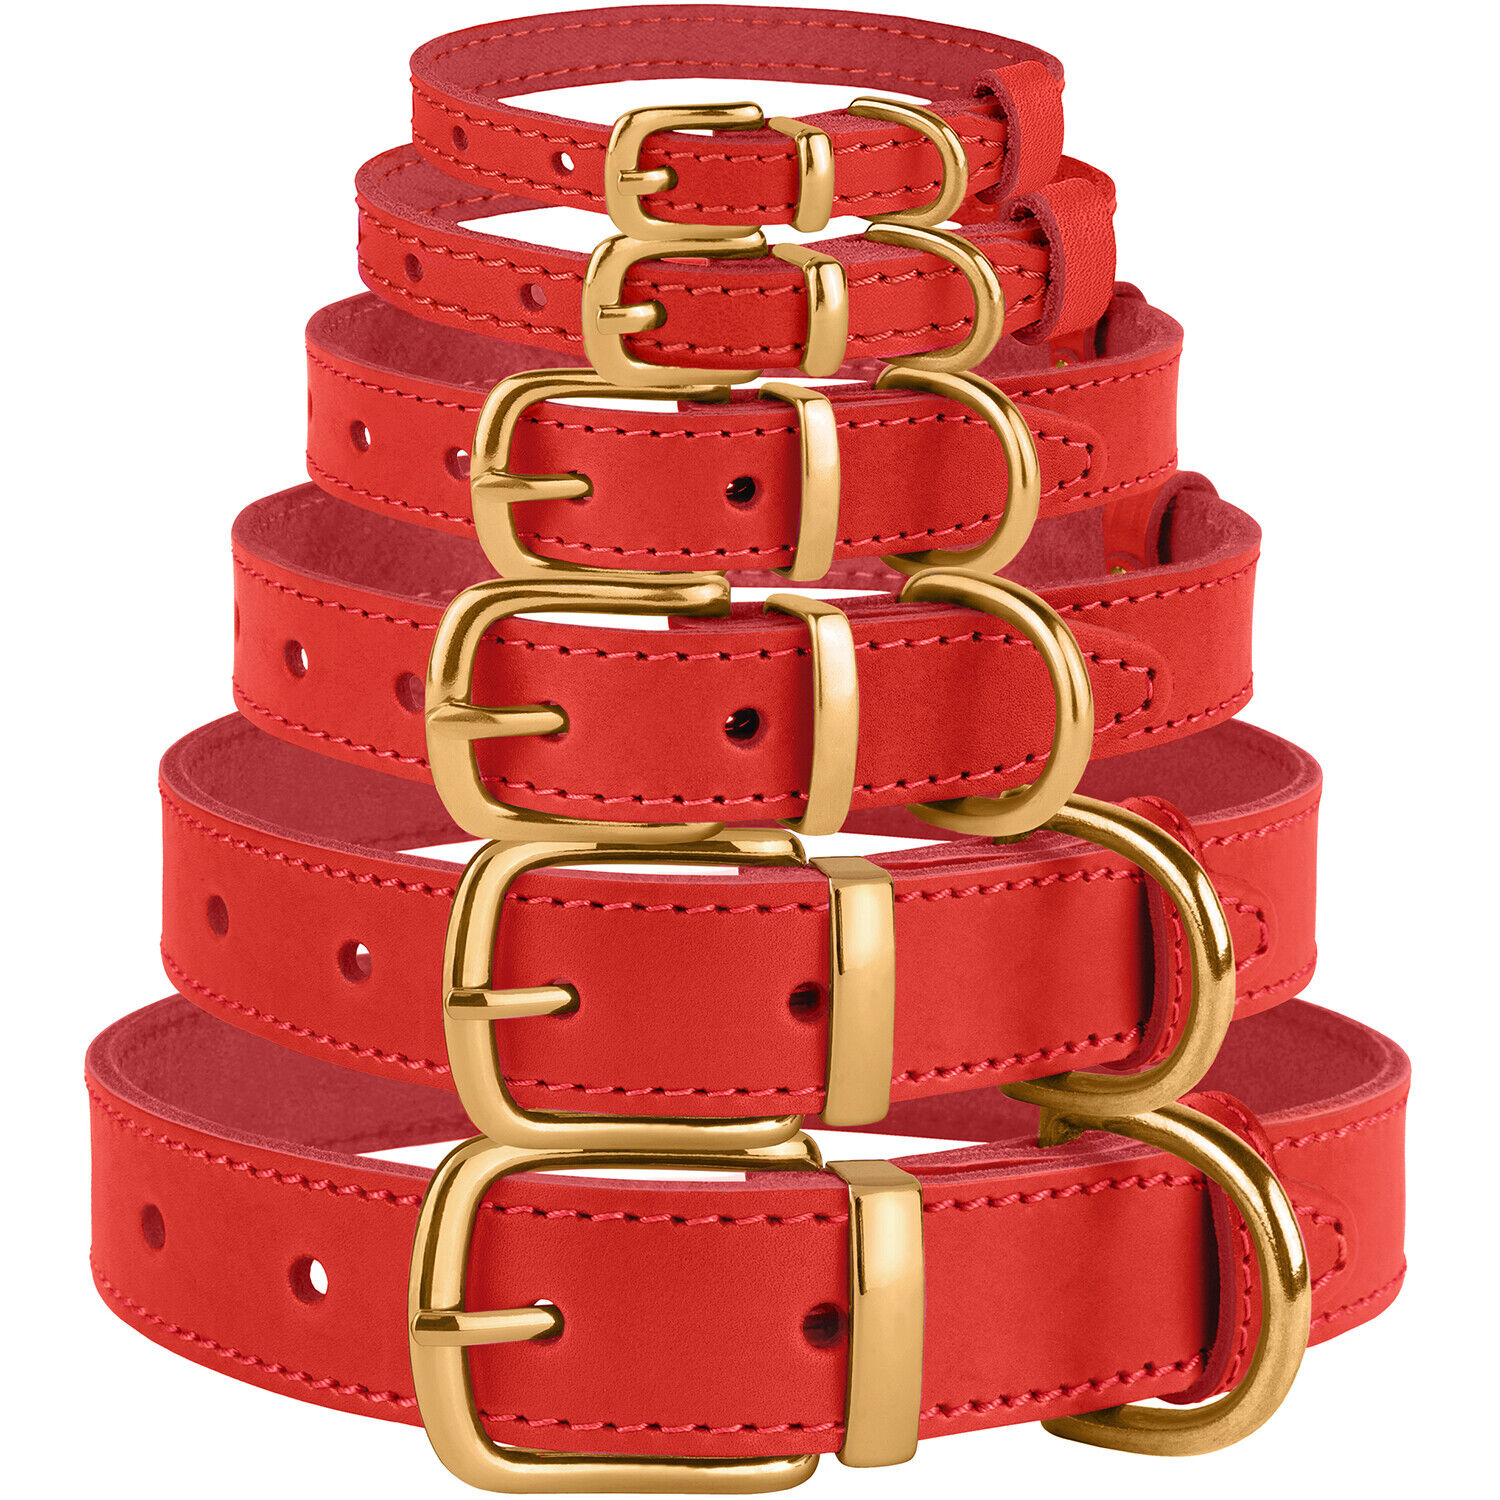 Leather Dog Collar Brass Buckle Collars for Dogs Red Brown Black Green XS S M L